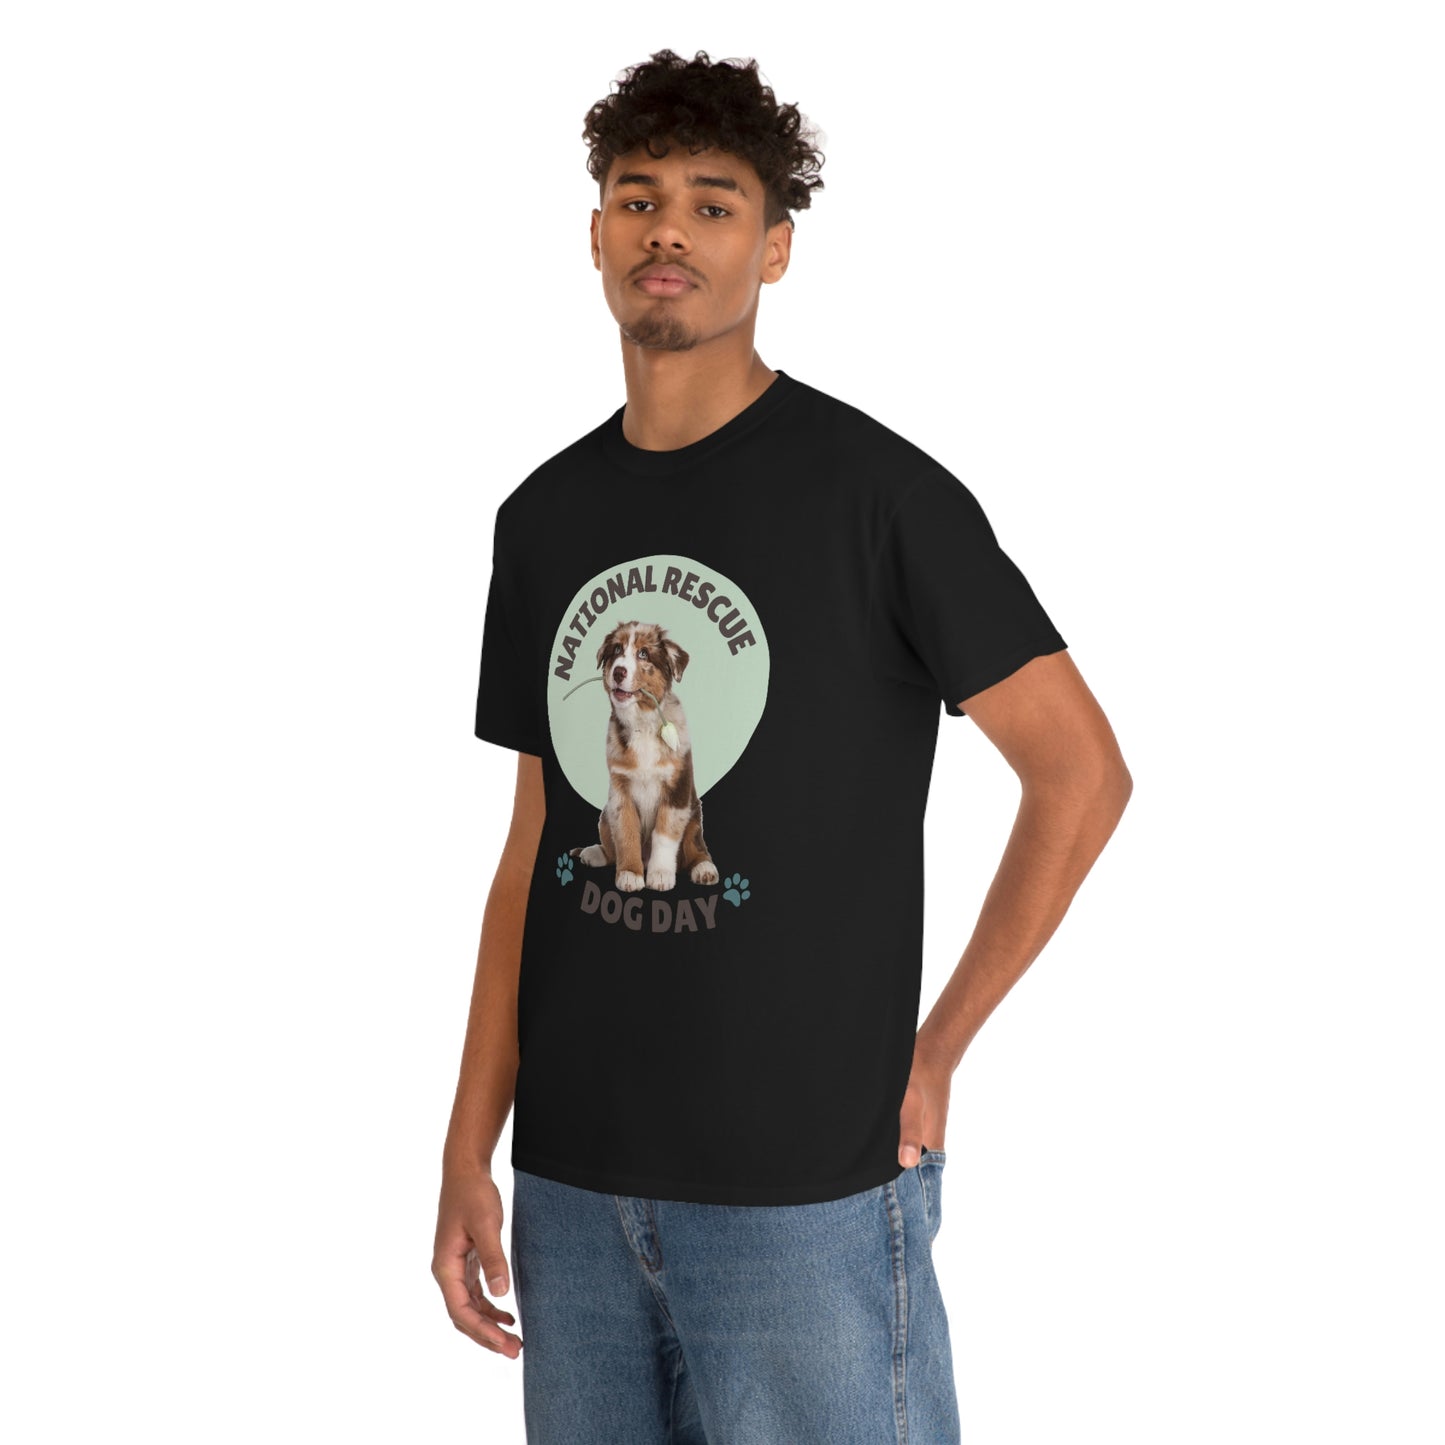 National Rescue Dog Day with paws design Graphic tee shirt